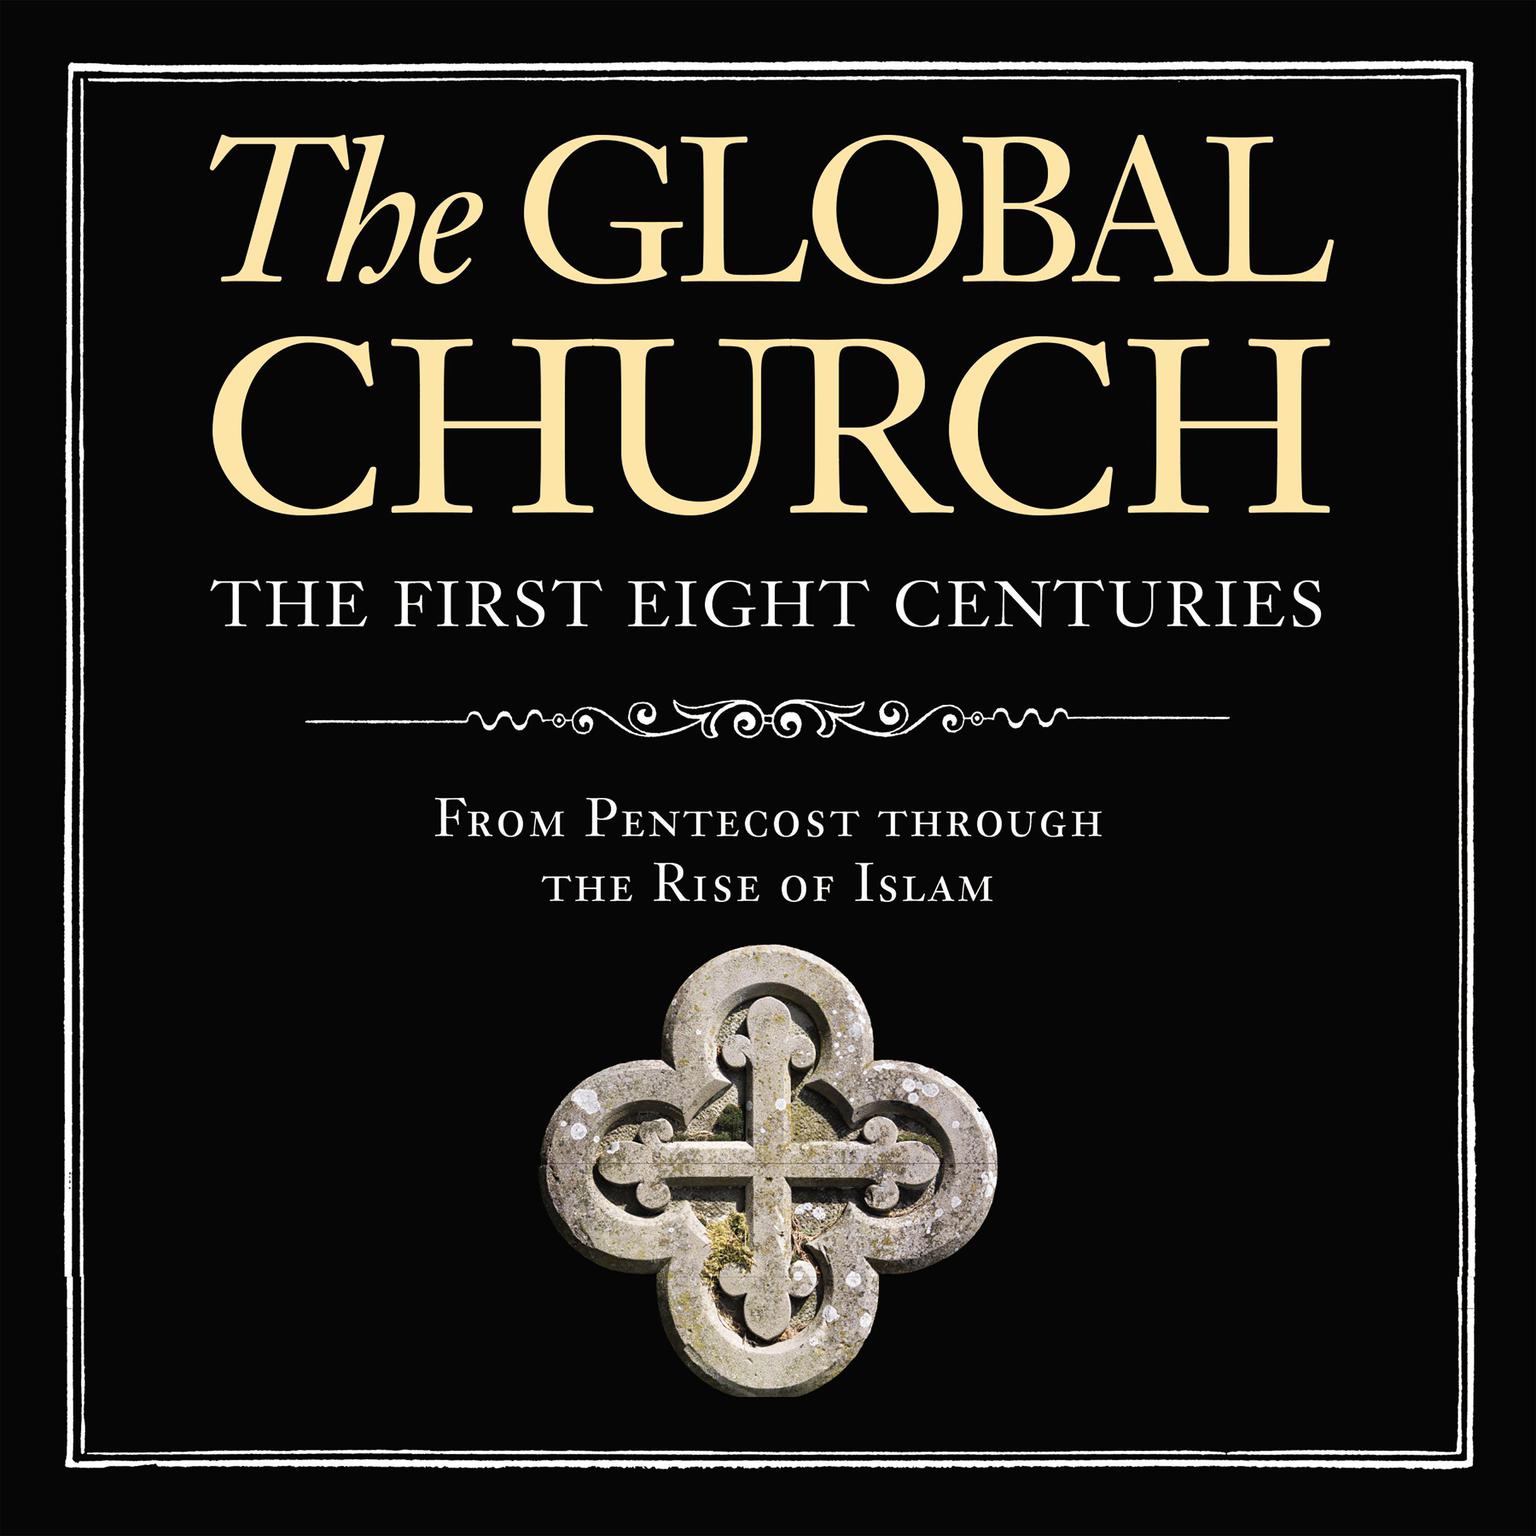 The Global Church---The First Eight Centuries: From Pentecost through the Rise of Islam Audiobook, by Donald Fairbairn